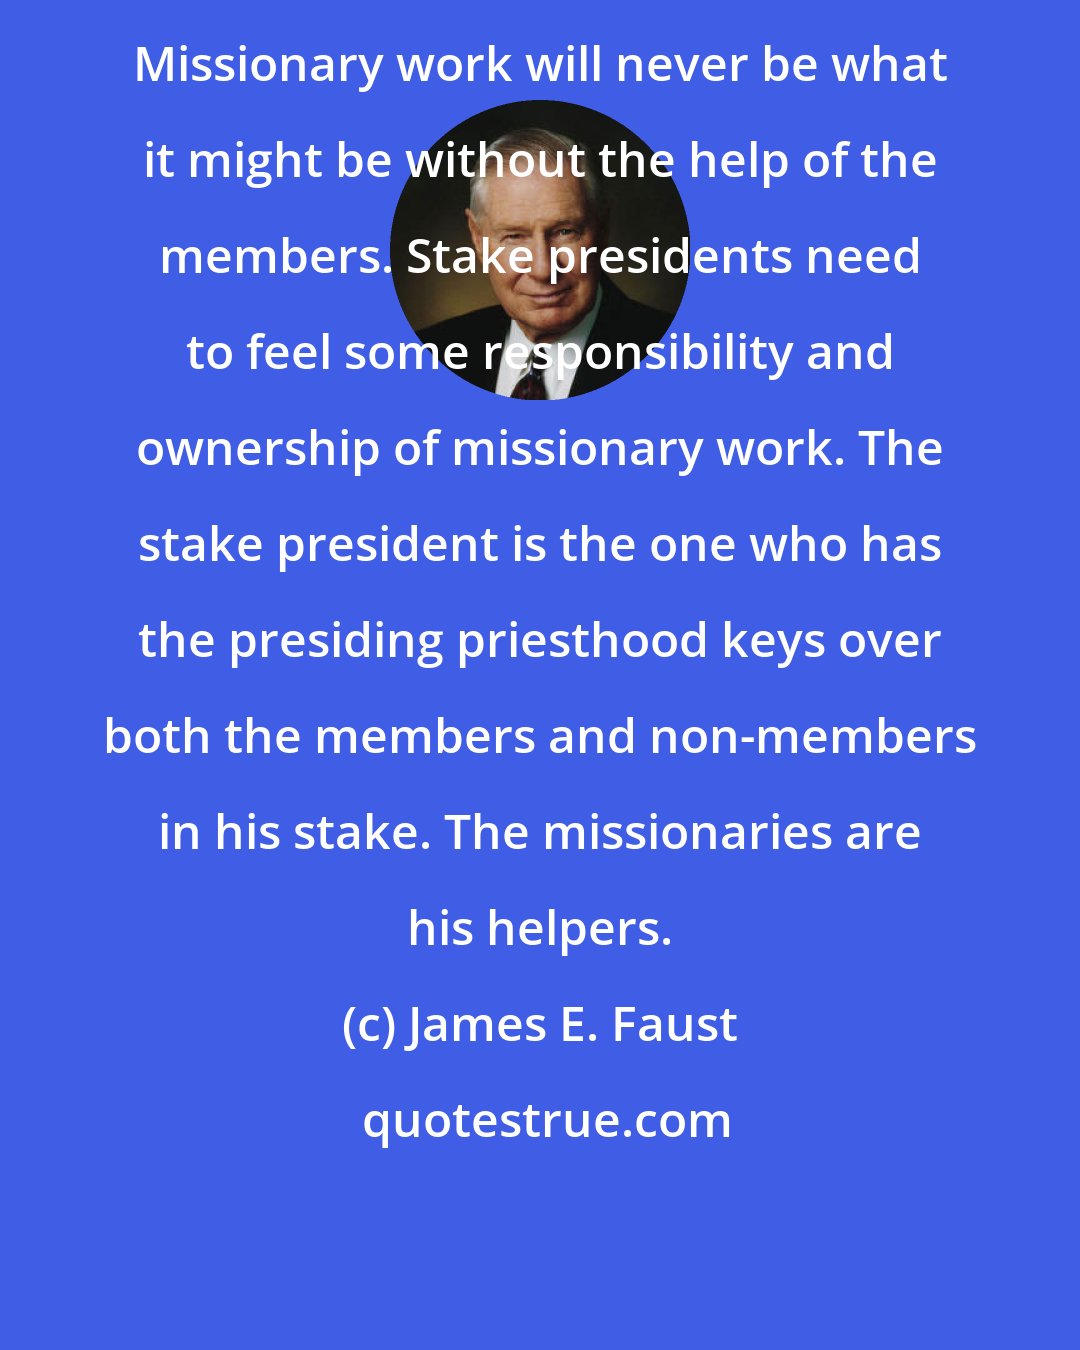 James E. Faust: Missionary work will never be what it might be without the help of the members. Stake presidents need to feel some responsibility and ownership of missionary work. The stake president is the one who has the presiding priesthood keys over both the members and non-members in his stake. The missionaries are his helpers.